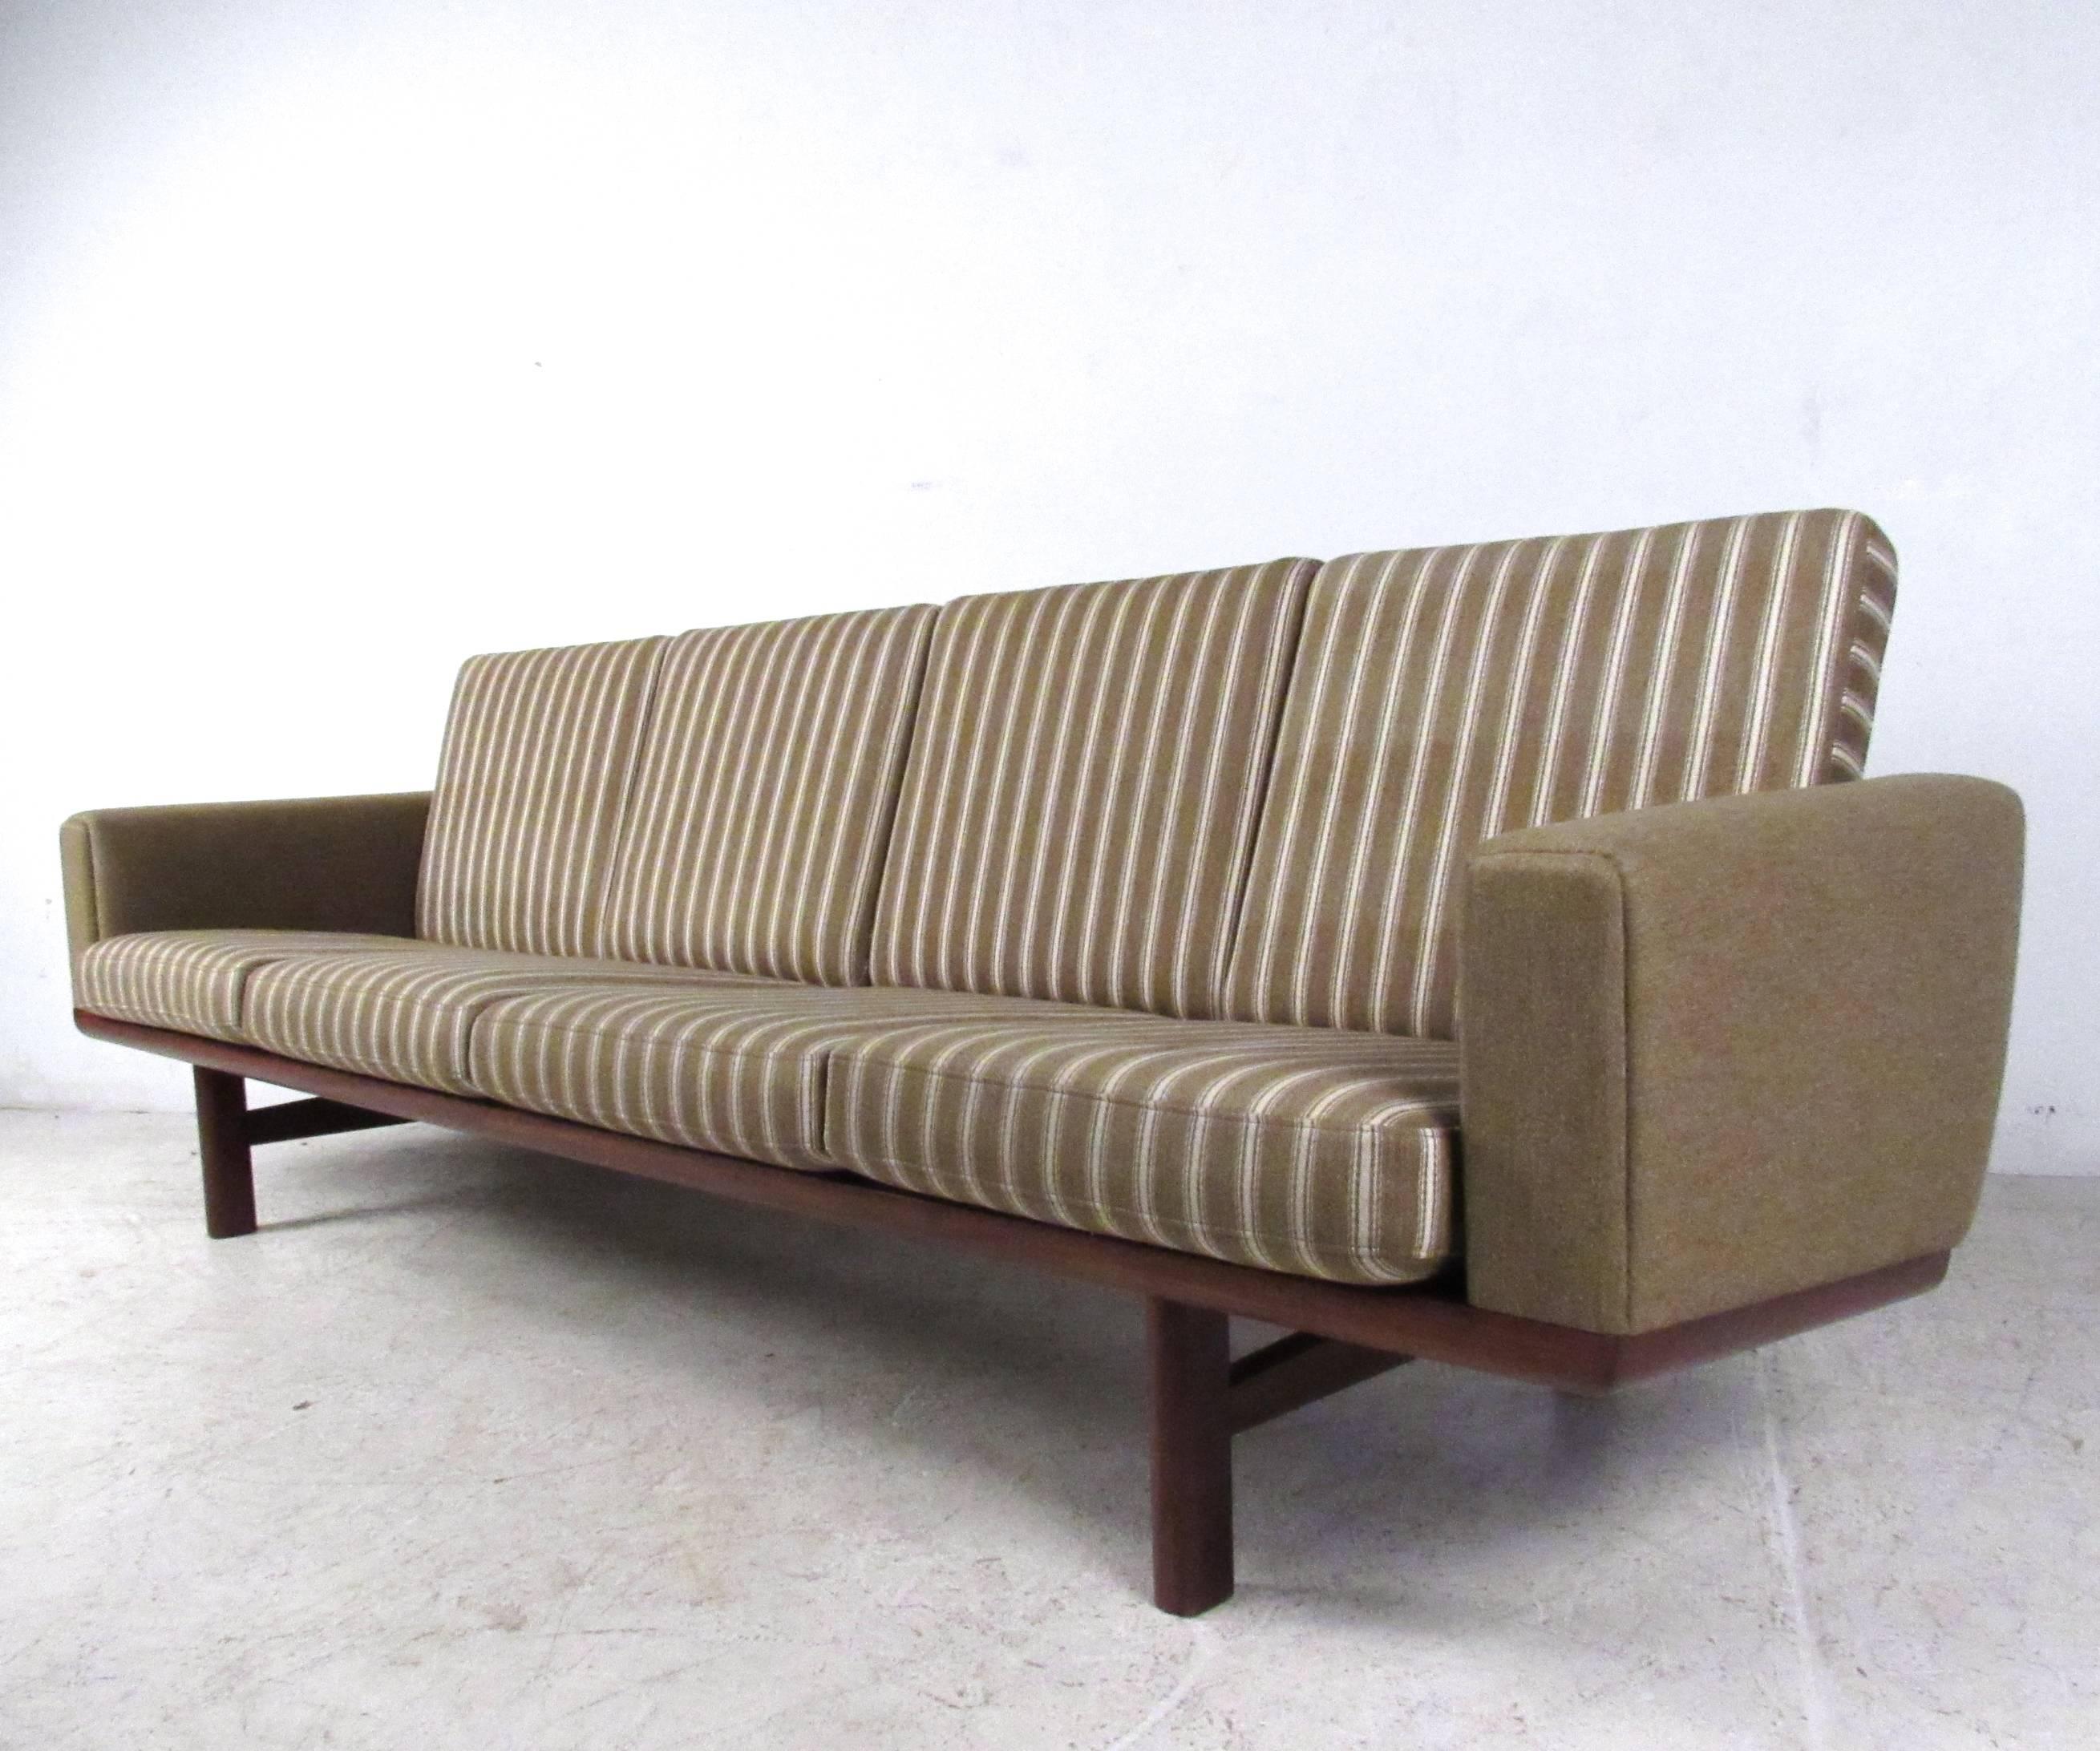 This beautiful vintage four seat sofa offers a stylish seating solution for a variety of interiors. Wegner's unique slat back design pairs wonderfully with the piece's straight lines, vintage fabric and spacious seats. Designed by Hans Wegner for